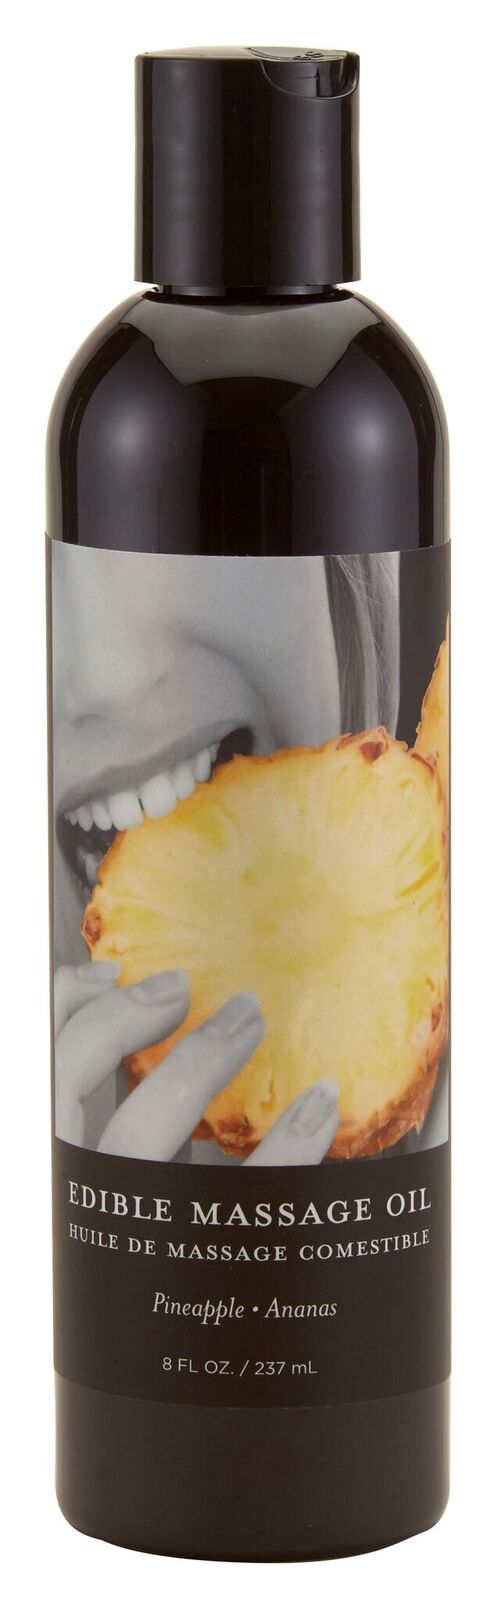 Earthly Body Earthly Body Massage Oil Edible Pineapple 8 oz at $14.99